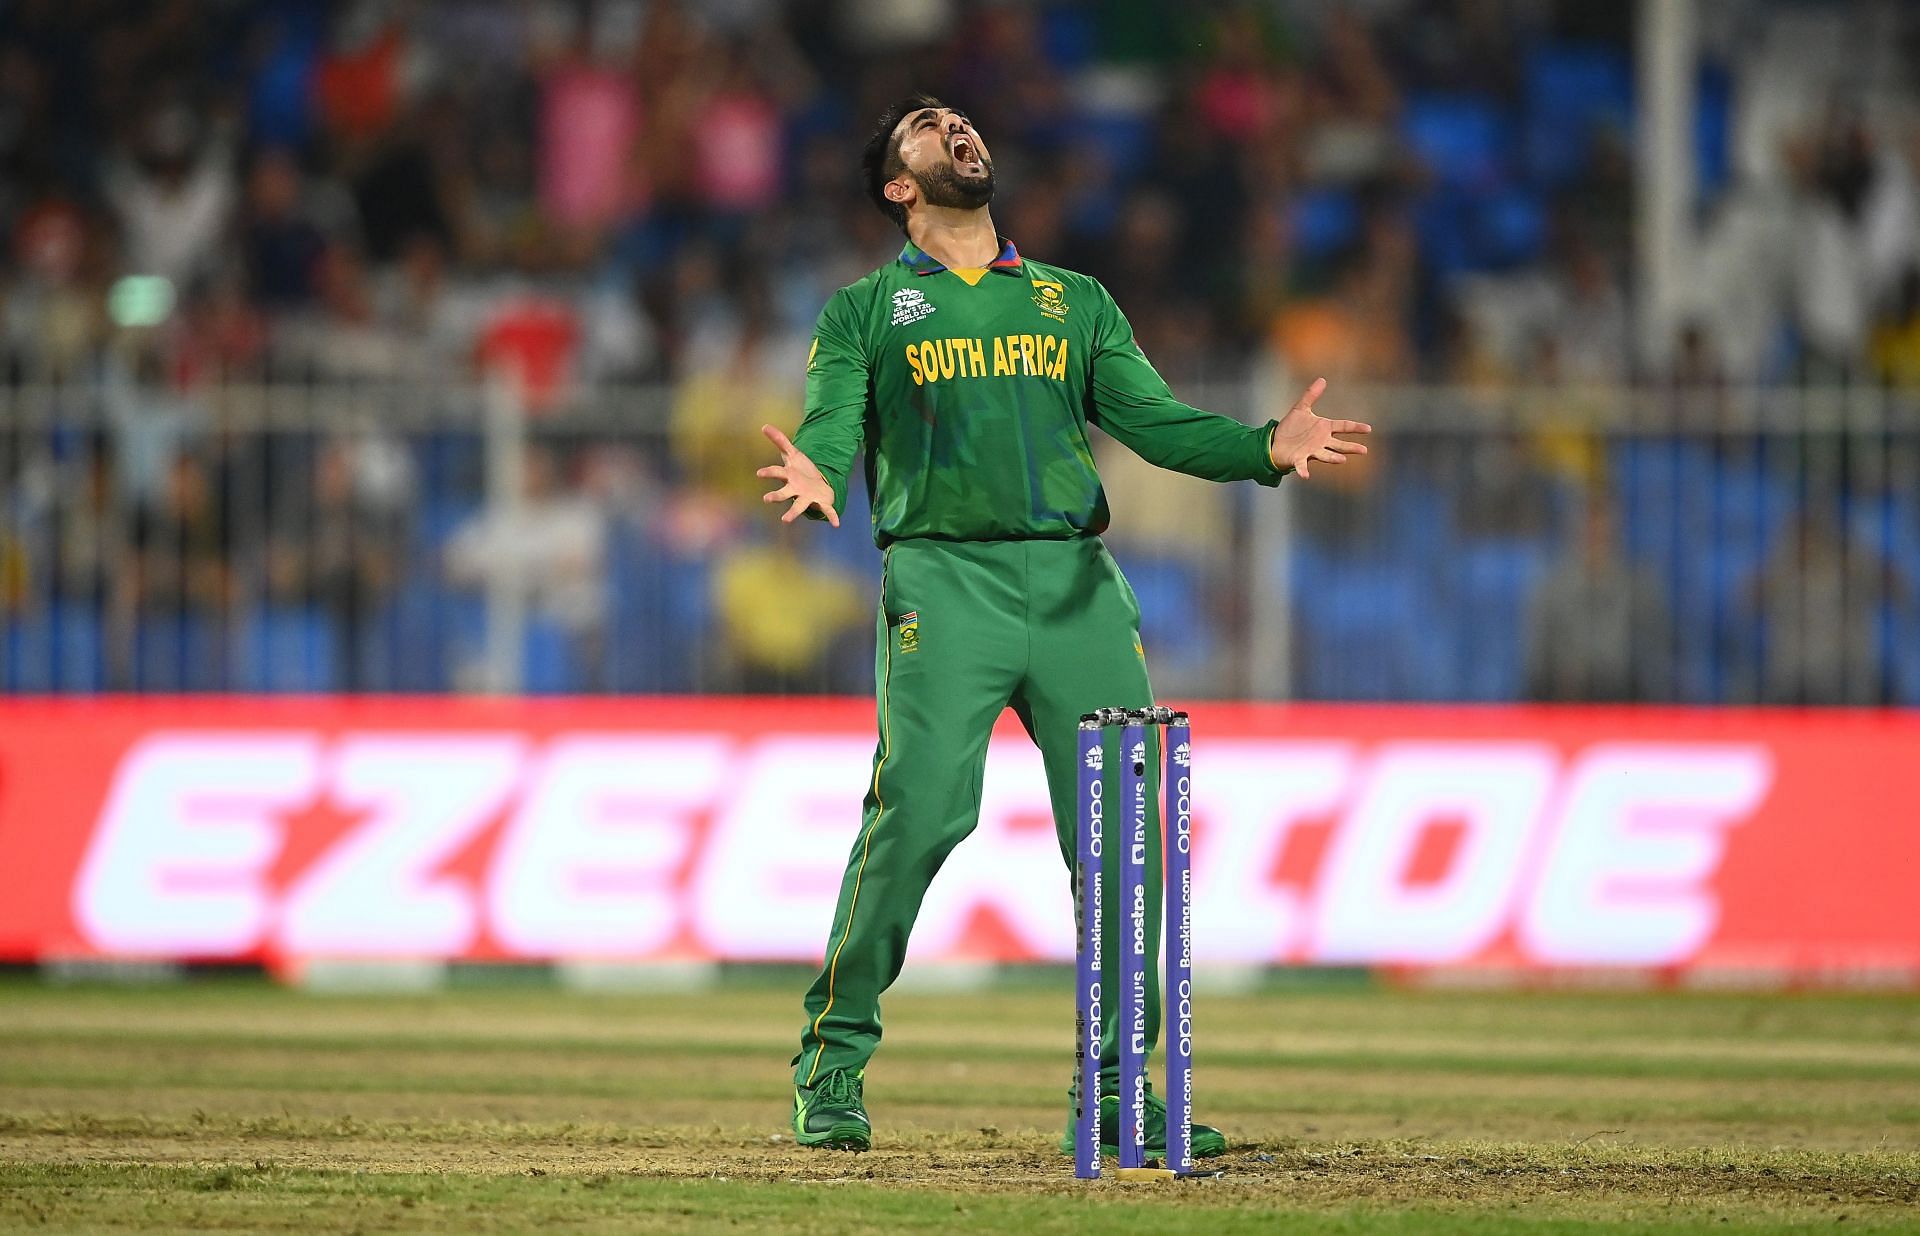 Shamsi could be the key for South Africa in the series